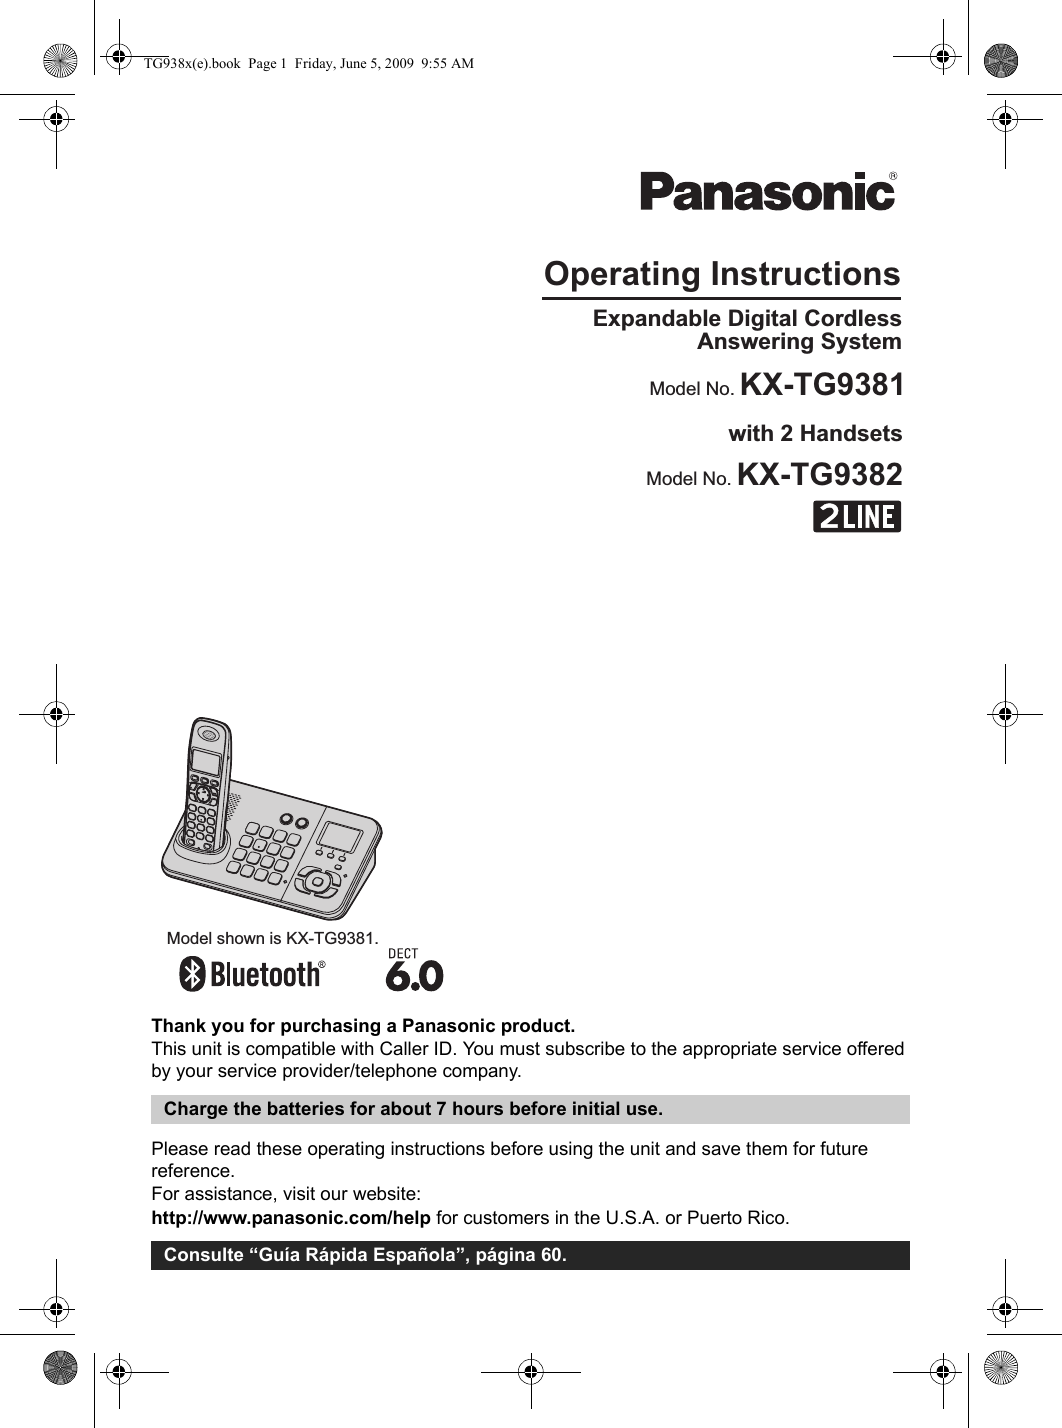 Thank you for purchasing a Panasonic product.This unit is compatible with Caller ID. You must subscribe to the appropriate service offered by your service provider/telephone company.Please read these operating instructions before using the unit and save them for future reference.For assistance, visit our website:http://www.panasonic.com/help for customers in the U.S.A. or Puerto Rico.Charge the batteries for about 7 hours before initial use.Consulte “Guía Rápida Española”, página 60.Operating InstructionsModel shown is KX-TG9381.Expandable Digital Cordless Answering SystemModel No. KX-TG9381with 2 HandsetsModel No. KX-TG9382TG938x(e).book  Page 1  Friday, June 5, 2009  9:55 AM